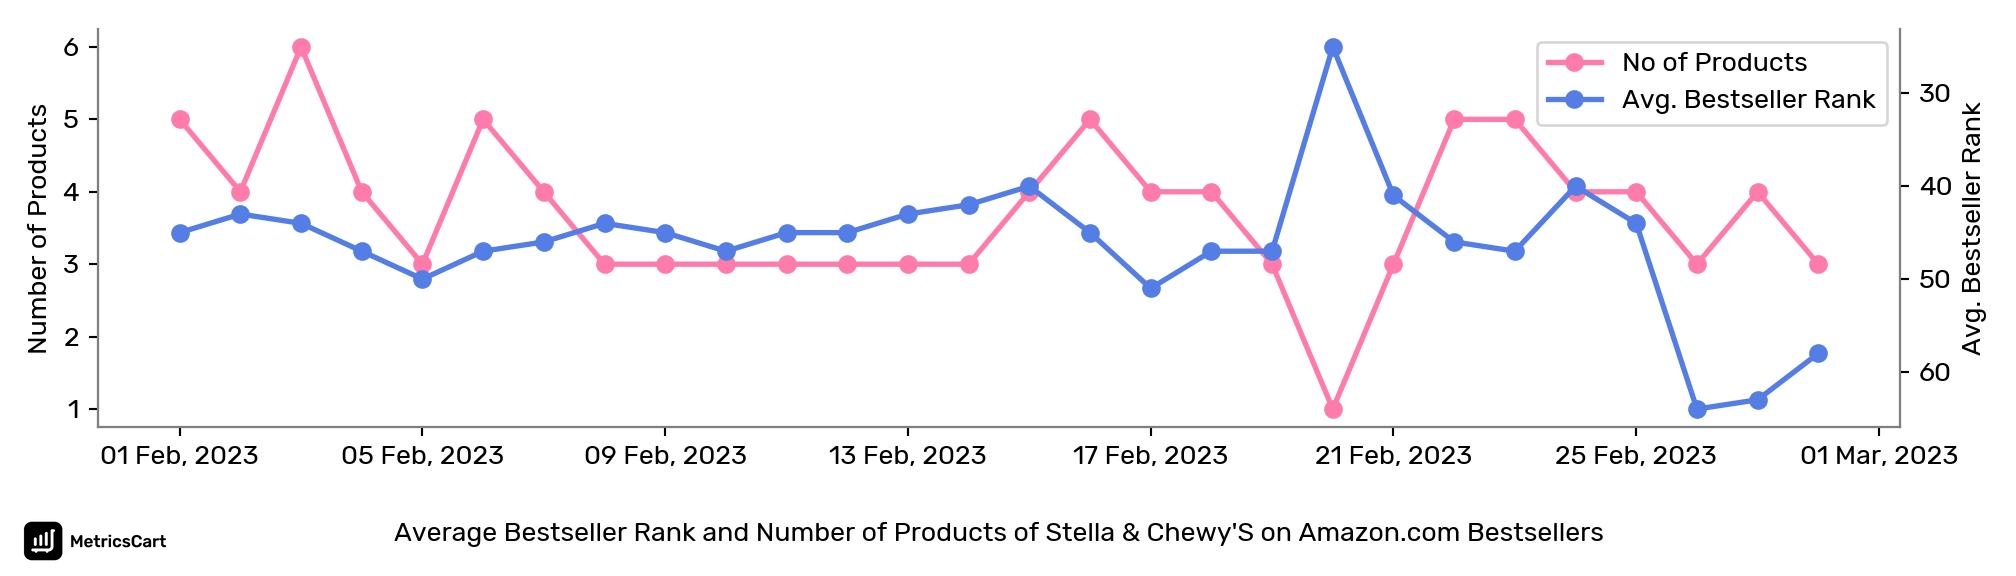 Average Bestseller Rank and Number of Products of Stella & Chewy'S on Amazon.com Bestsellers